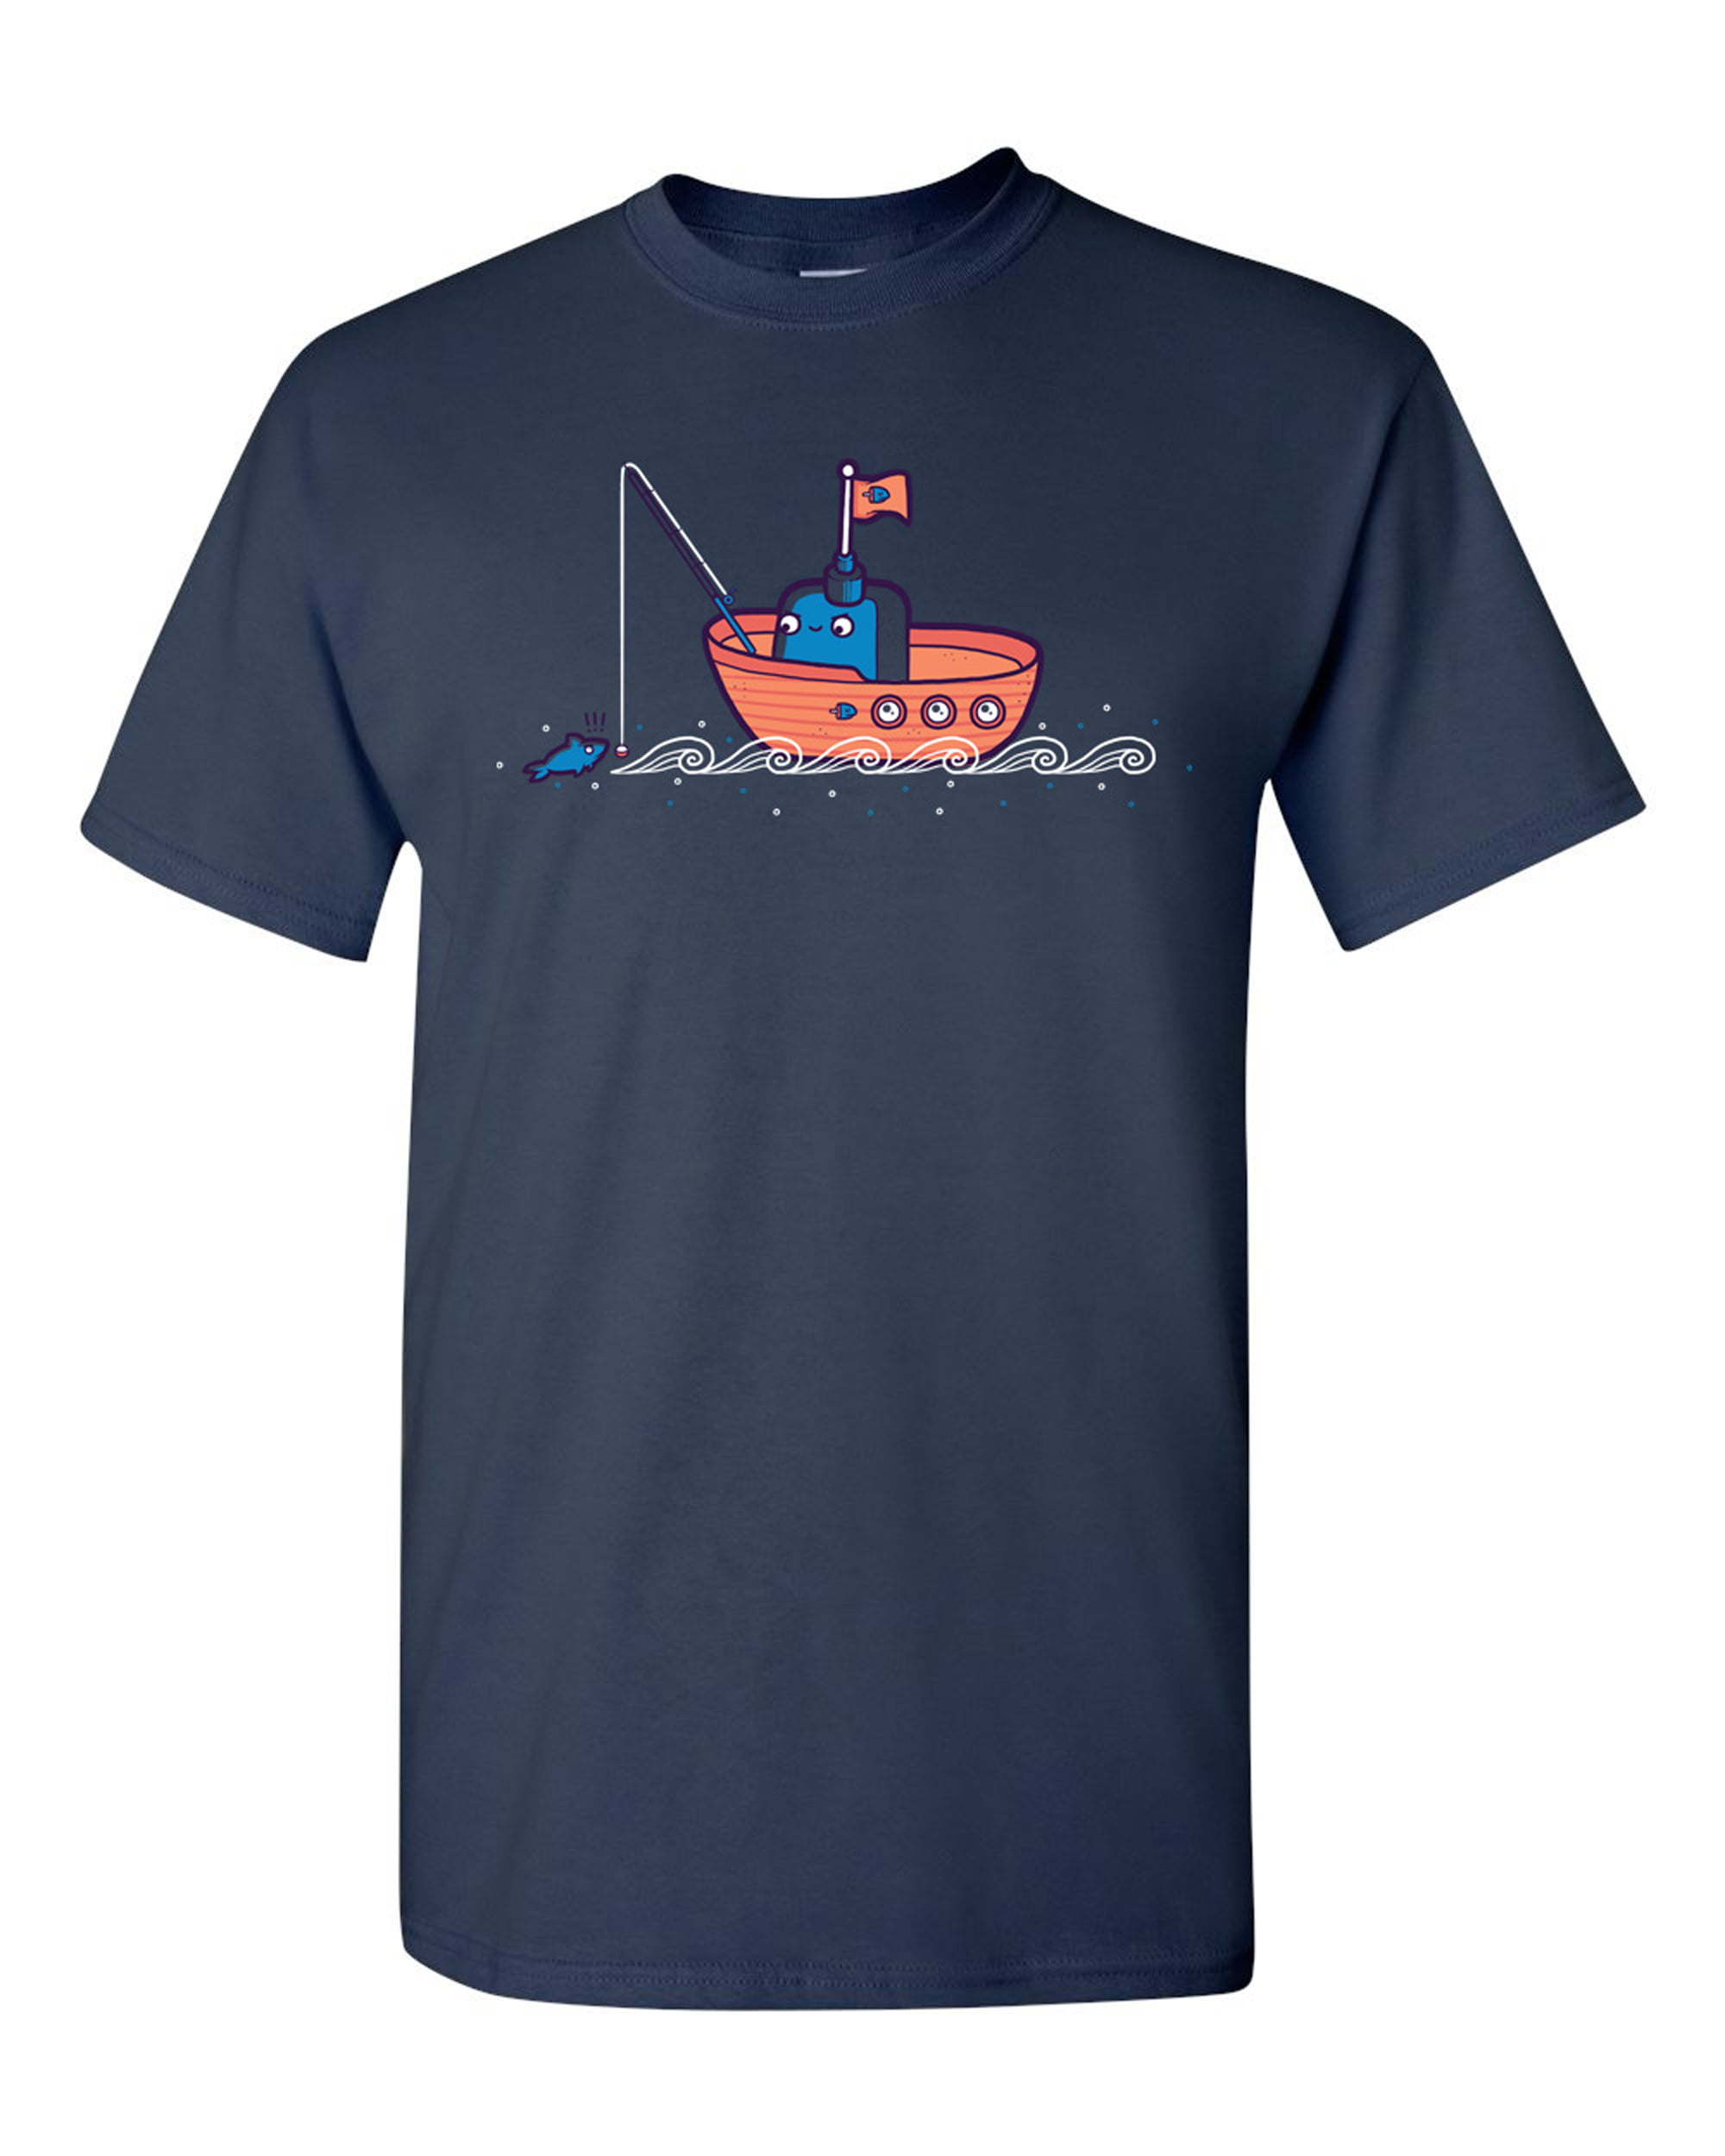 Randy Otter Fishing Boat DT Adult T-Shirt Tee 